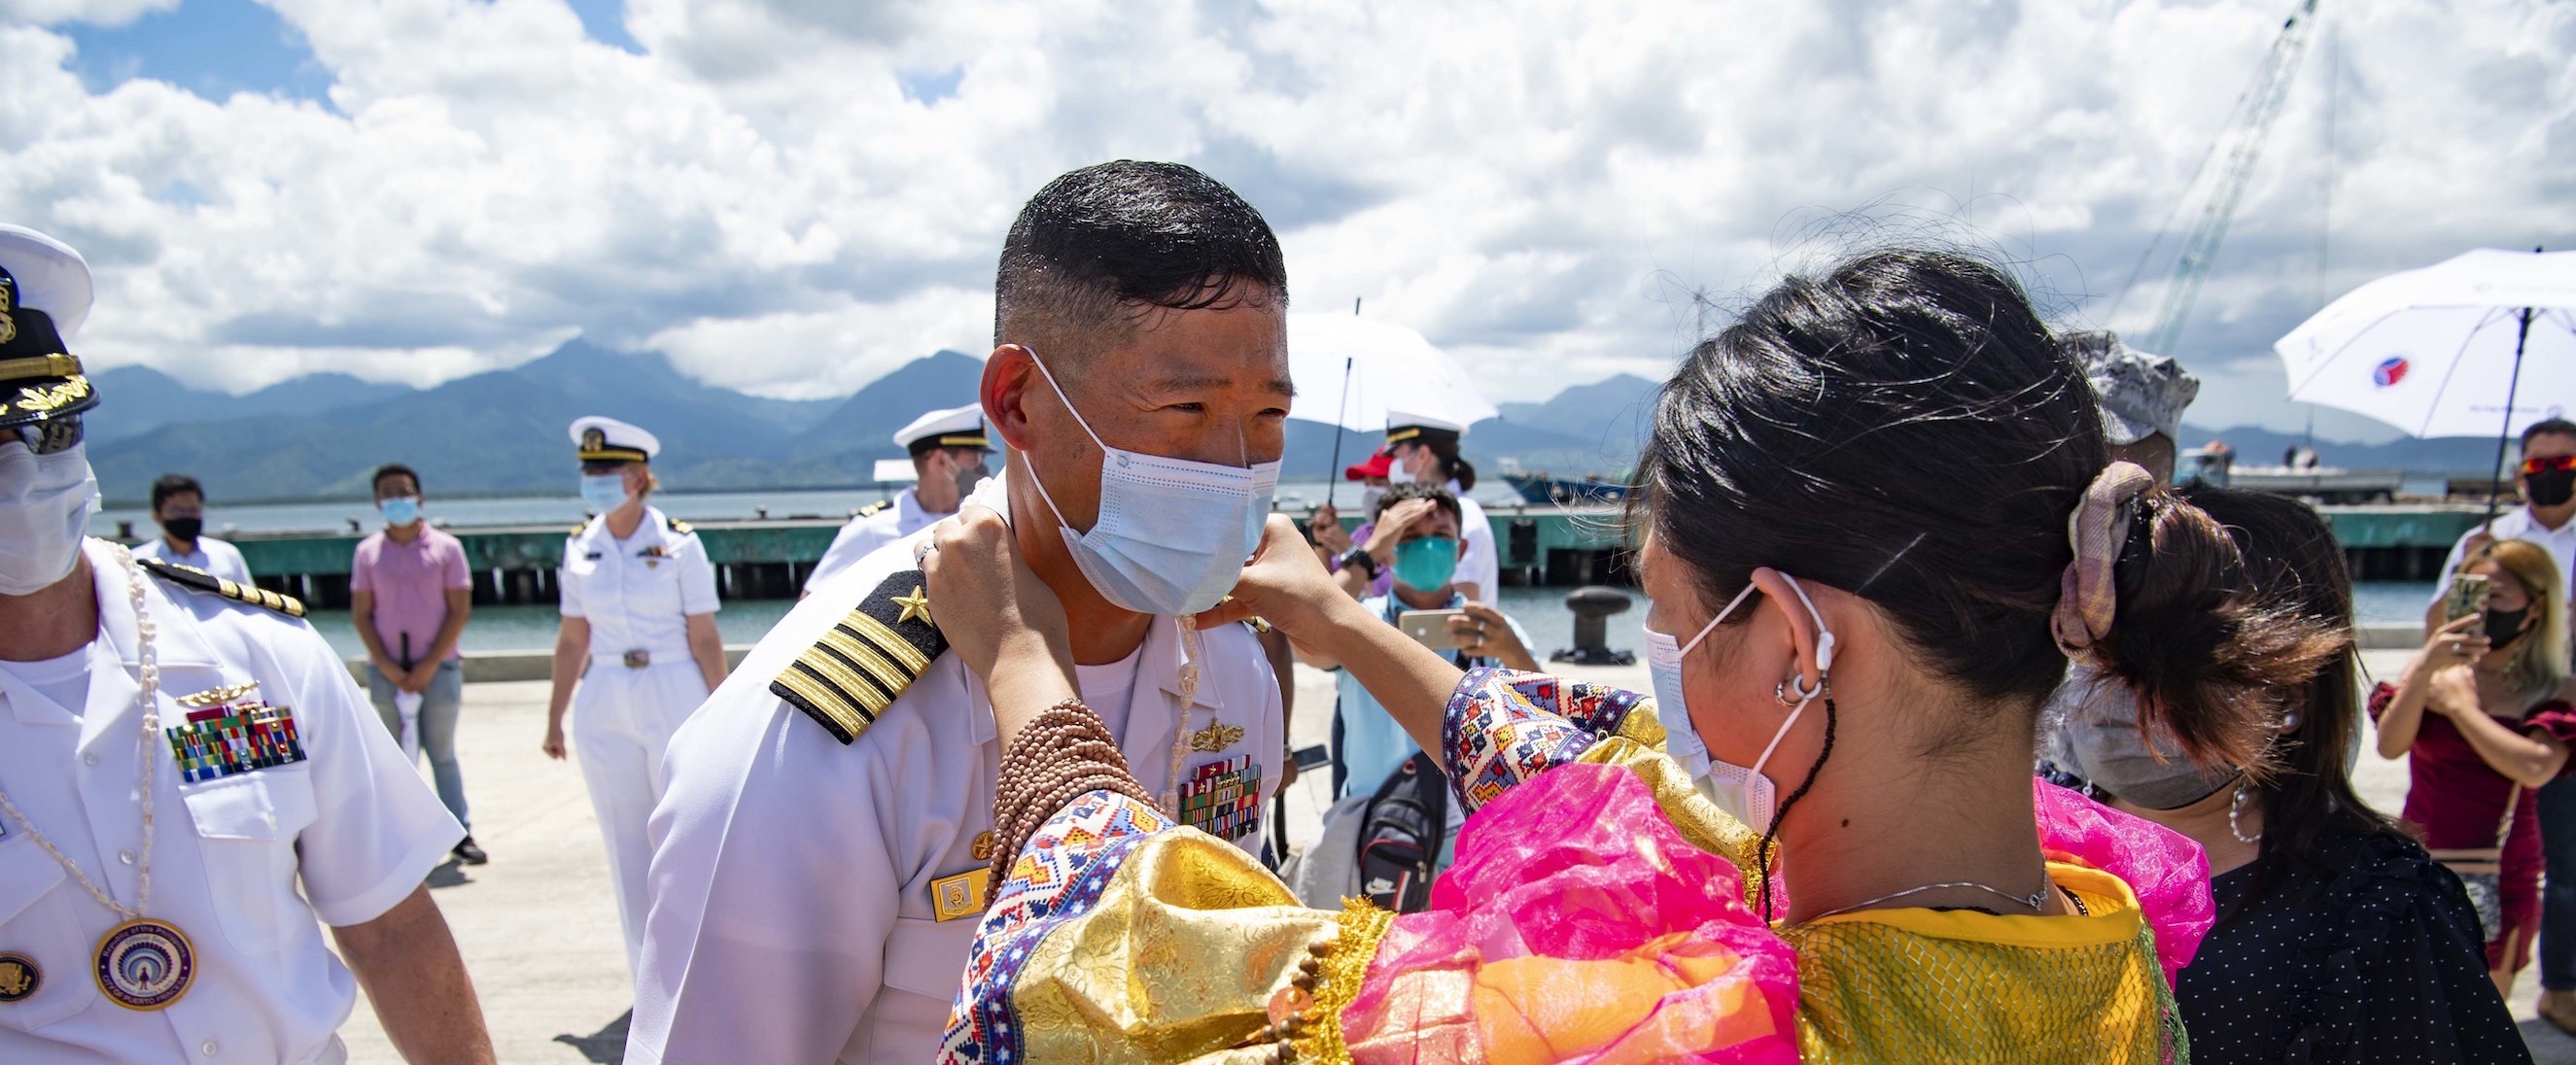 Capt. Hank Kim is greeted upon arrival to Puerto Princesa during a Pacific Partnership 2022 mission stop in the Philippines.